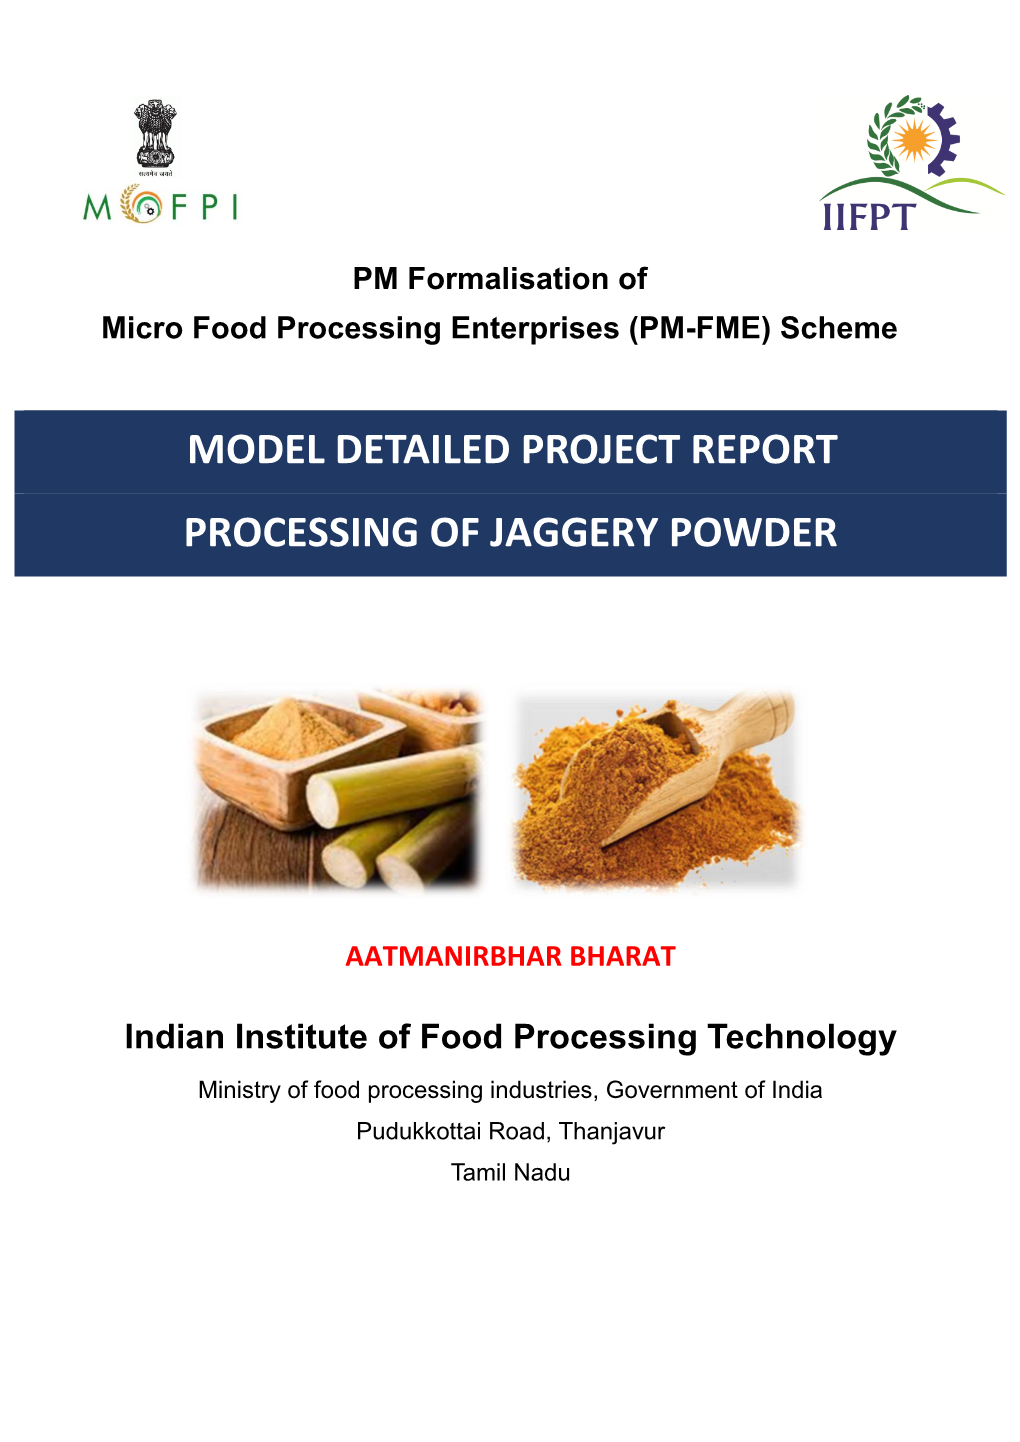 Model Detailed Project Report Processing of Jaggery Powder